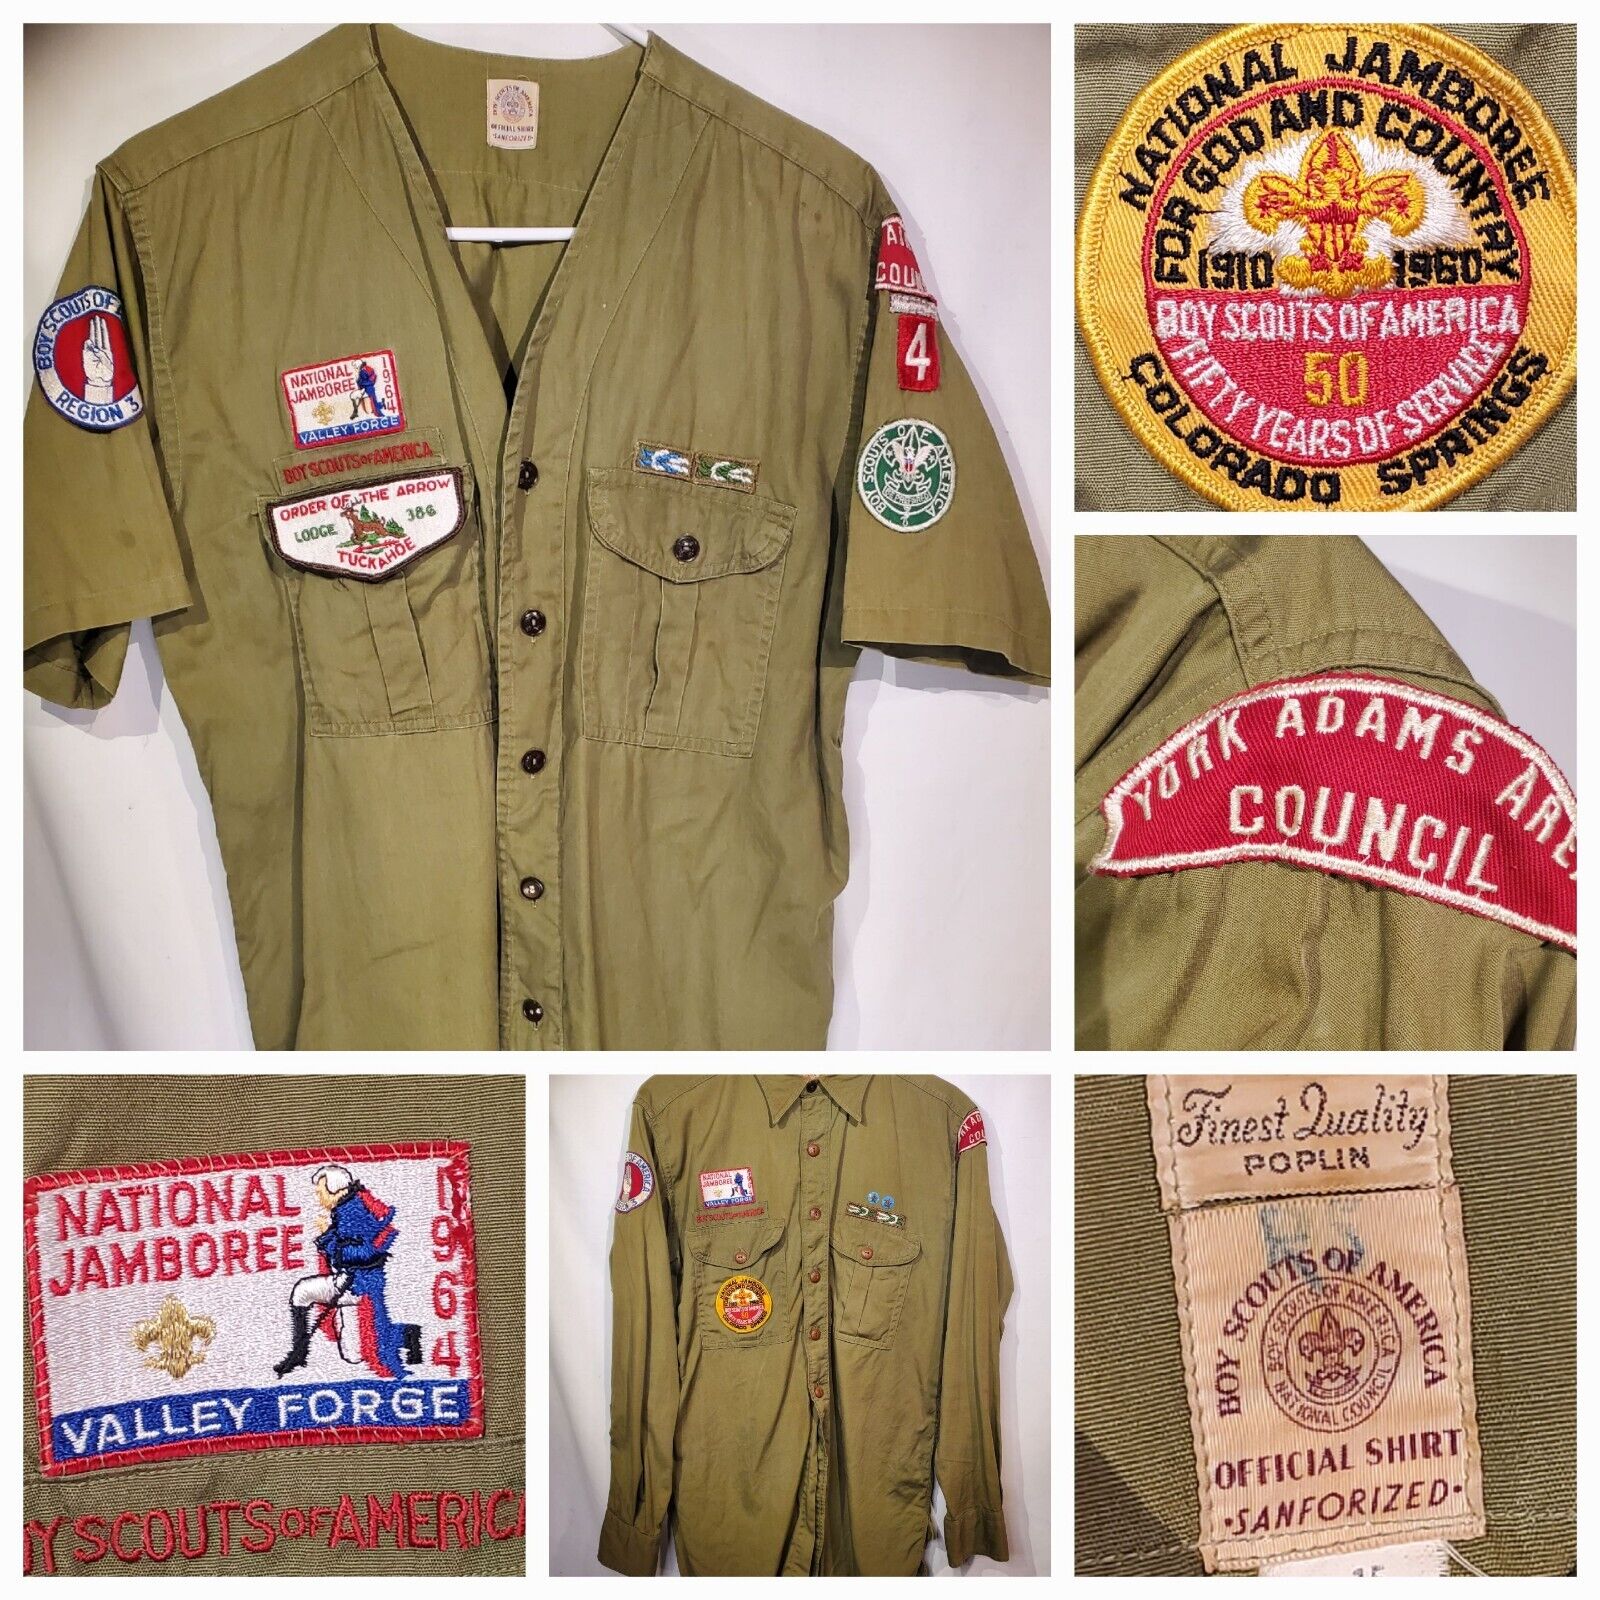 Vintage 1960s Lot of 4 BSA Shirts w/Patches Pennsylvania York Adams Valley Forge